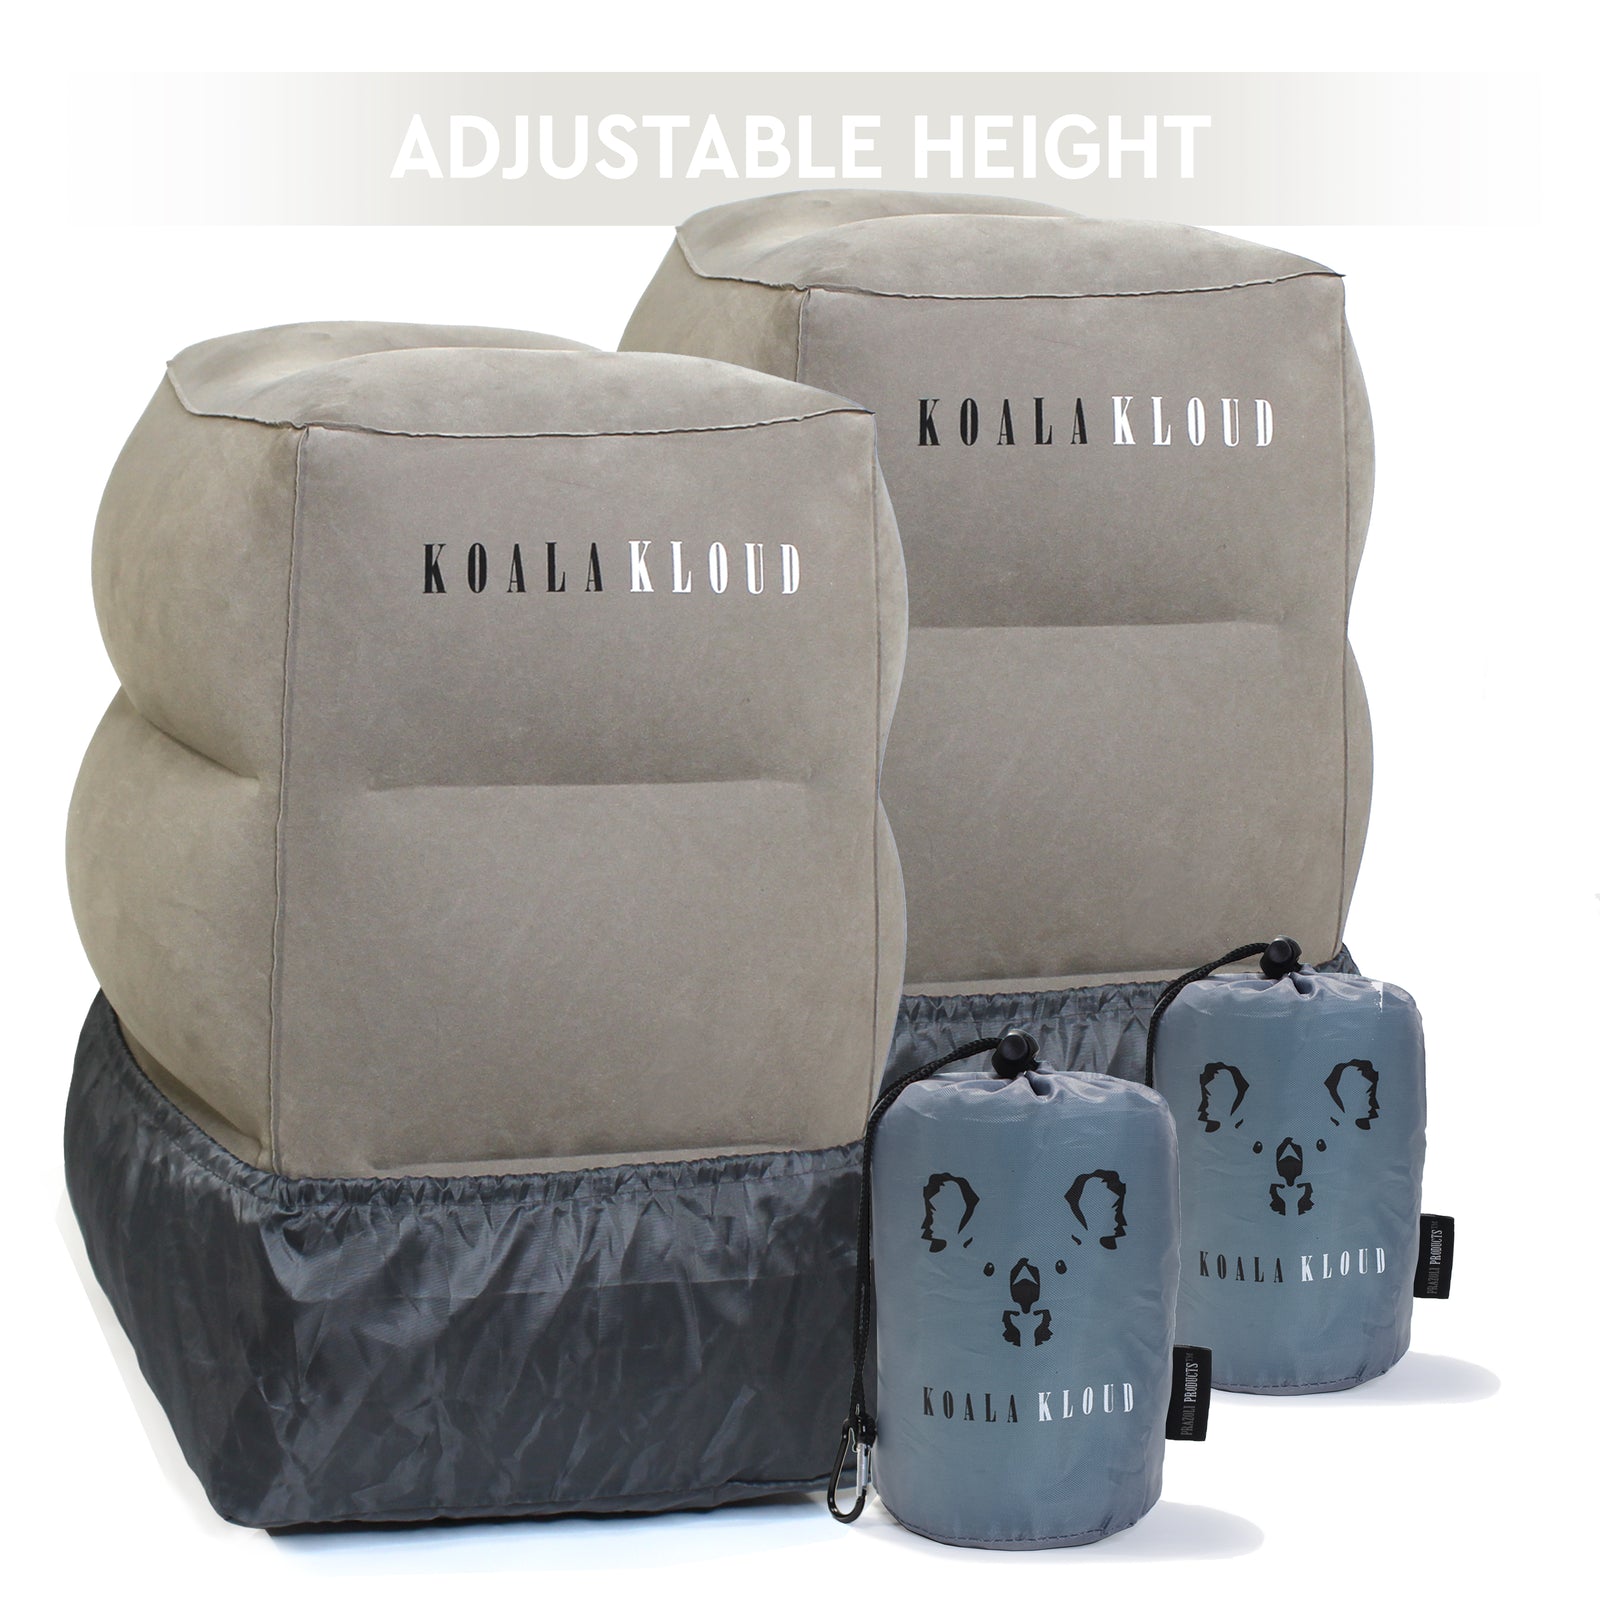 https://cdn.shopify.com/s/files/1/0248/7864/5351/products/koala-kloud-gray-inflatable-footrest-plane-foot-rest-with-dust-cover-right-grey-set-of-2-adjustable_1600x.jpg?v=1655856934